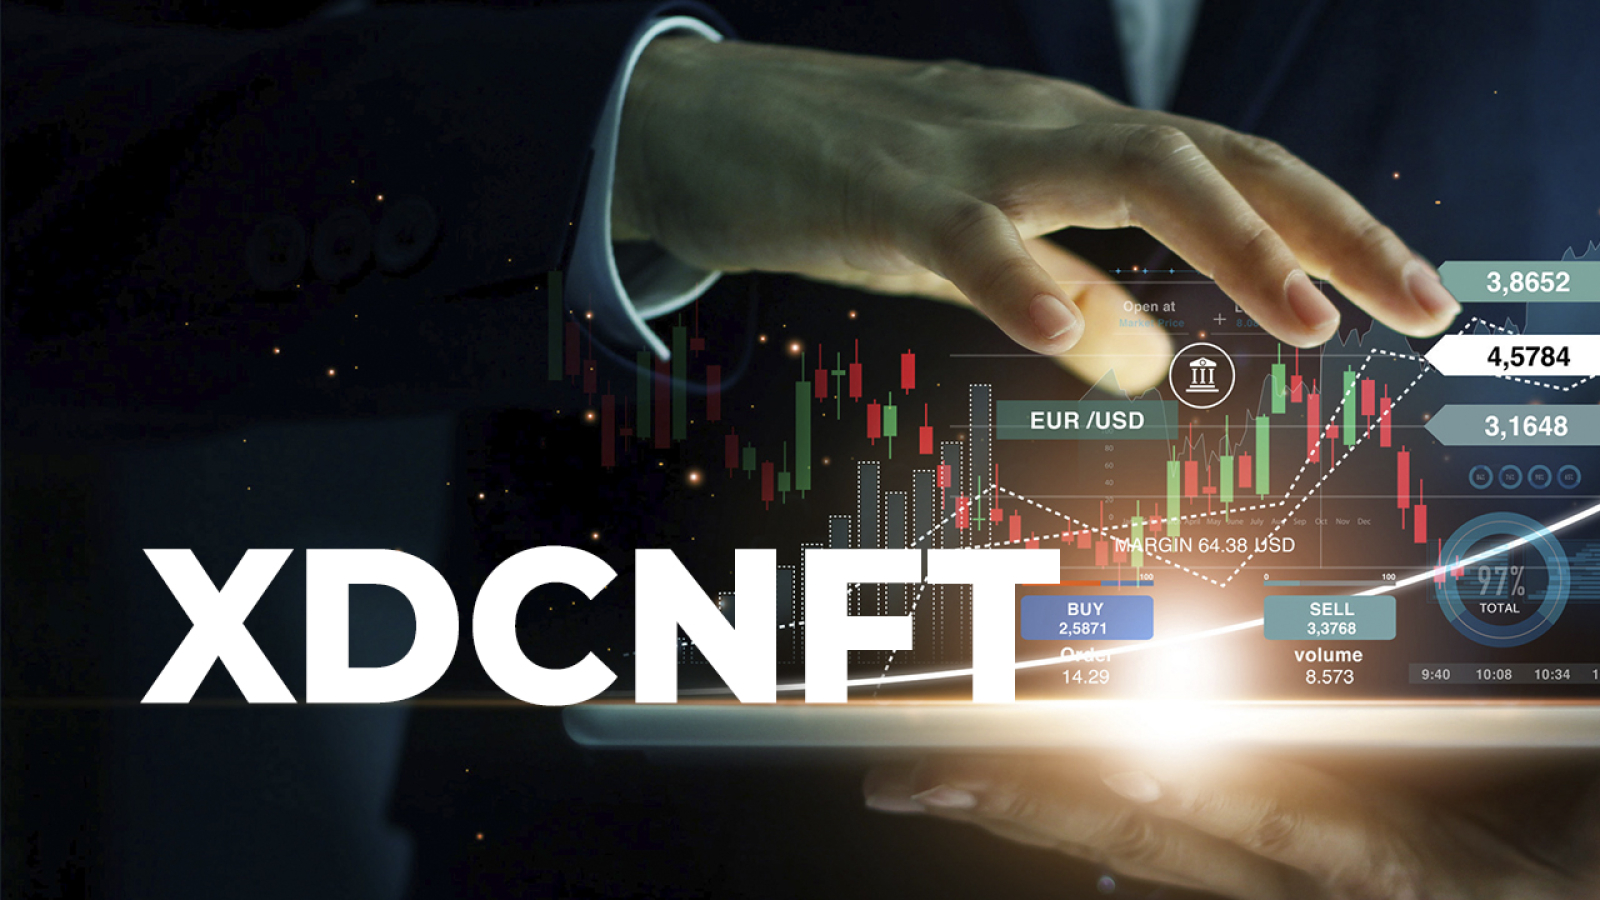 XDCNFT Marketplace Launched by XinFin XDC Network